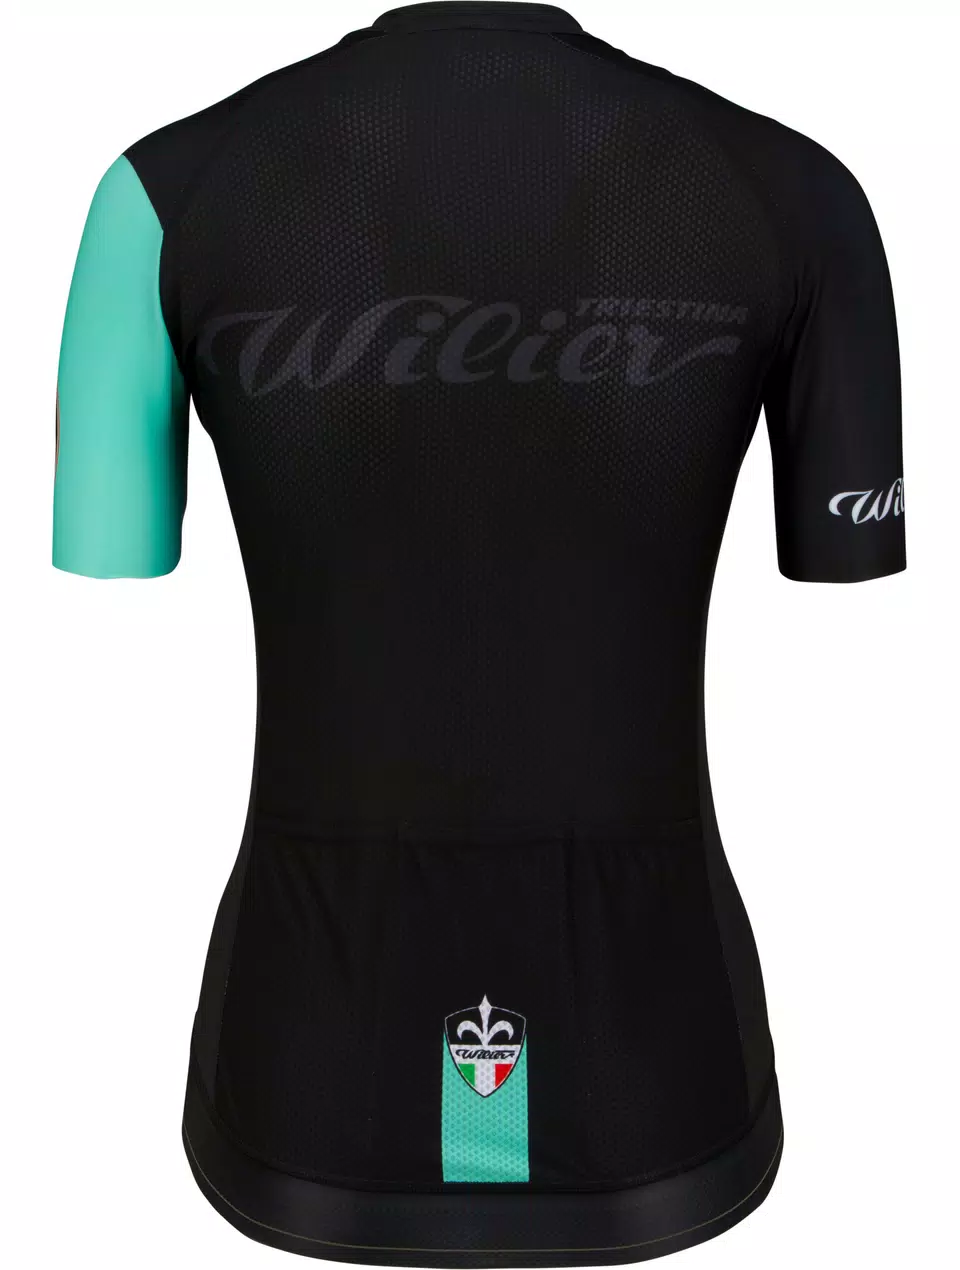 Maillot mujer Wilier Cycling Club negra, Wilier Triestina